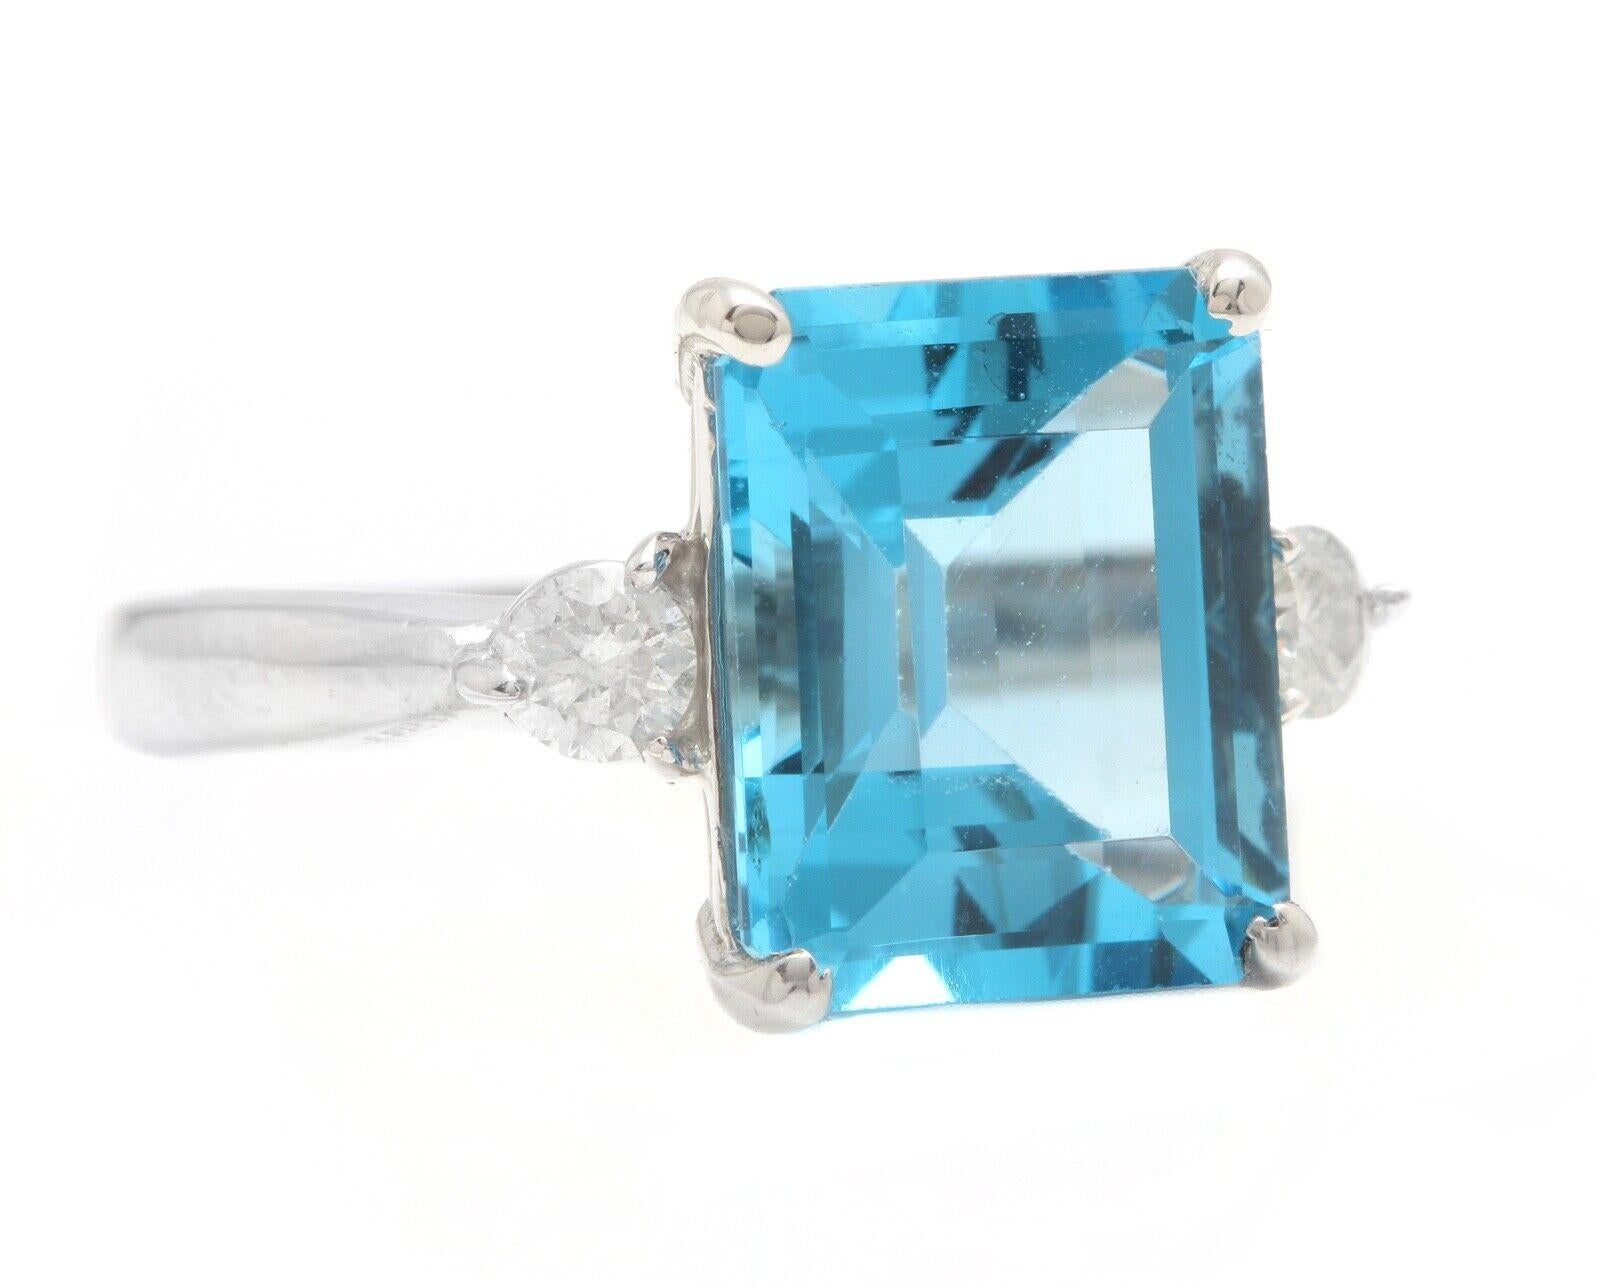 3.00 Carats Impressive Natural Swiss Blue Topaz and Diamond 14K White Gold Ring

Suggested Replacement Value: Approx. $3,000.00

Total Natural London Blue Topaz Weight is: Approx. 2.82 Carats

Topaz Measures: Approx. 11.00 x 9.00mm

Natural Round